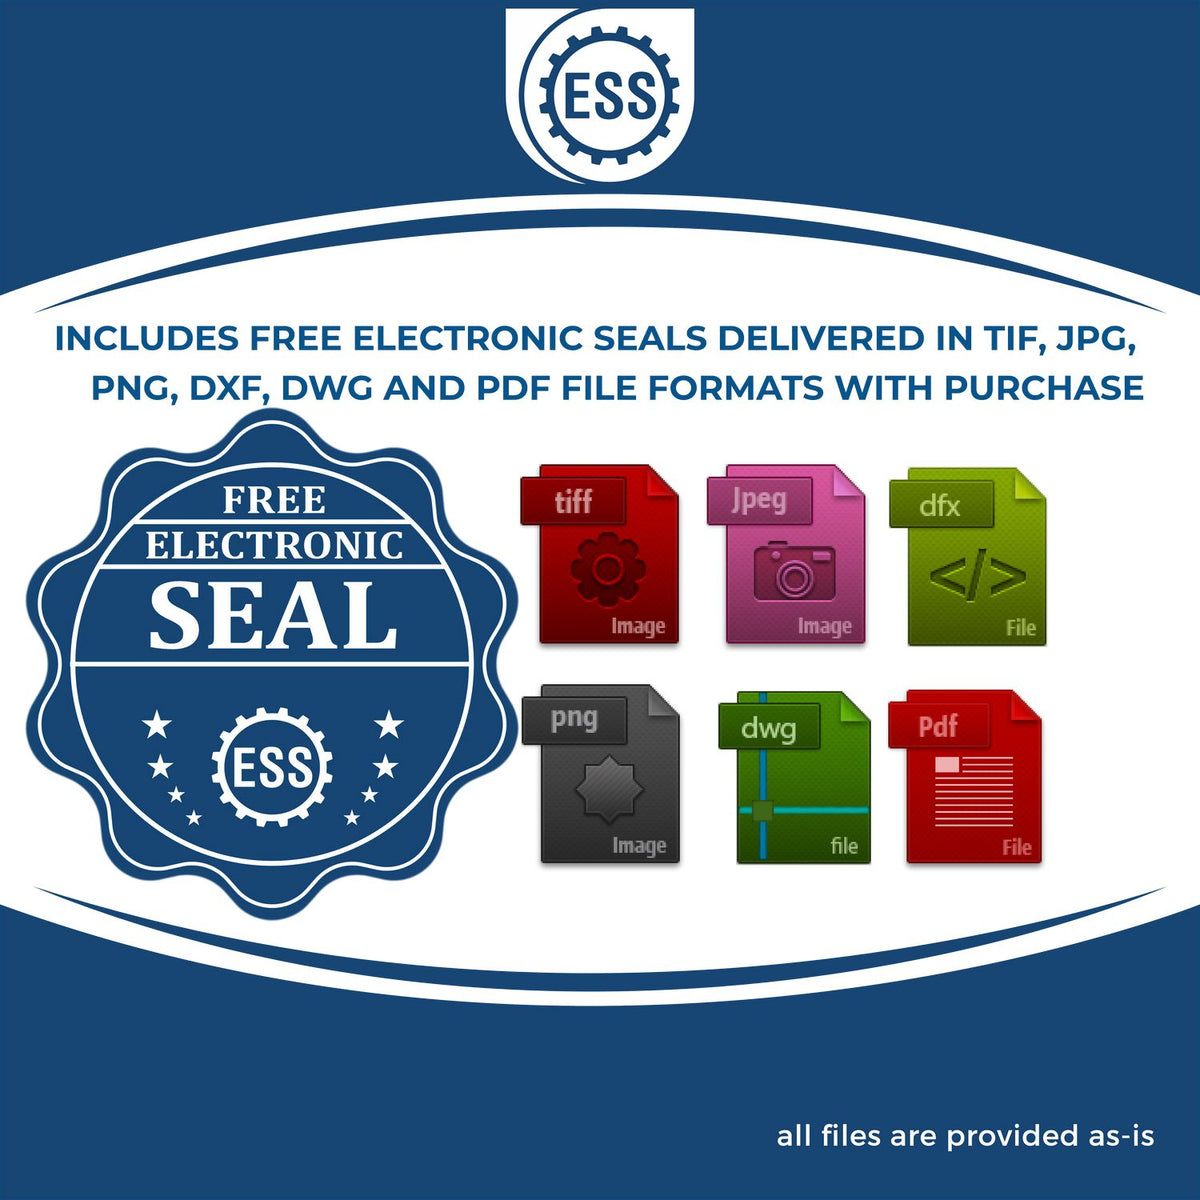 An infographic for the free electronic seal for the Extended Long Reach Colorado Architect Seal Embosser illustrating the different file type icons such as DXF, DWG, TIF, JPG and PNG.